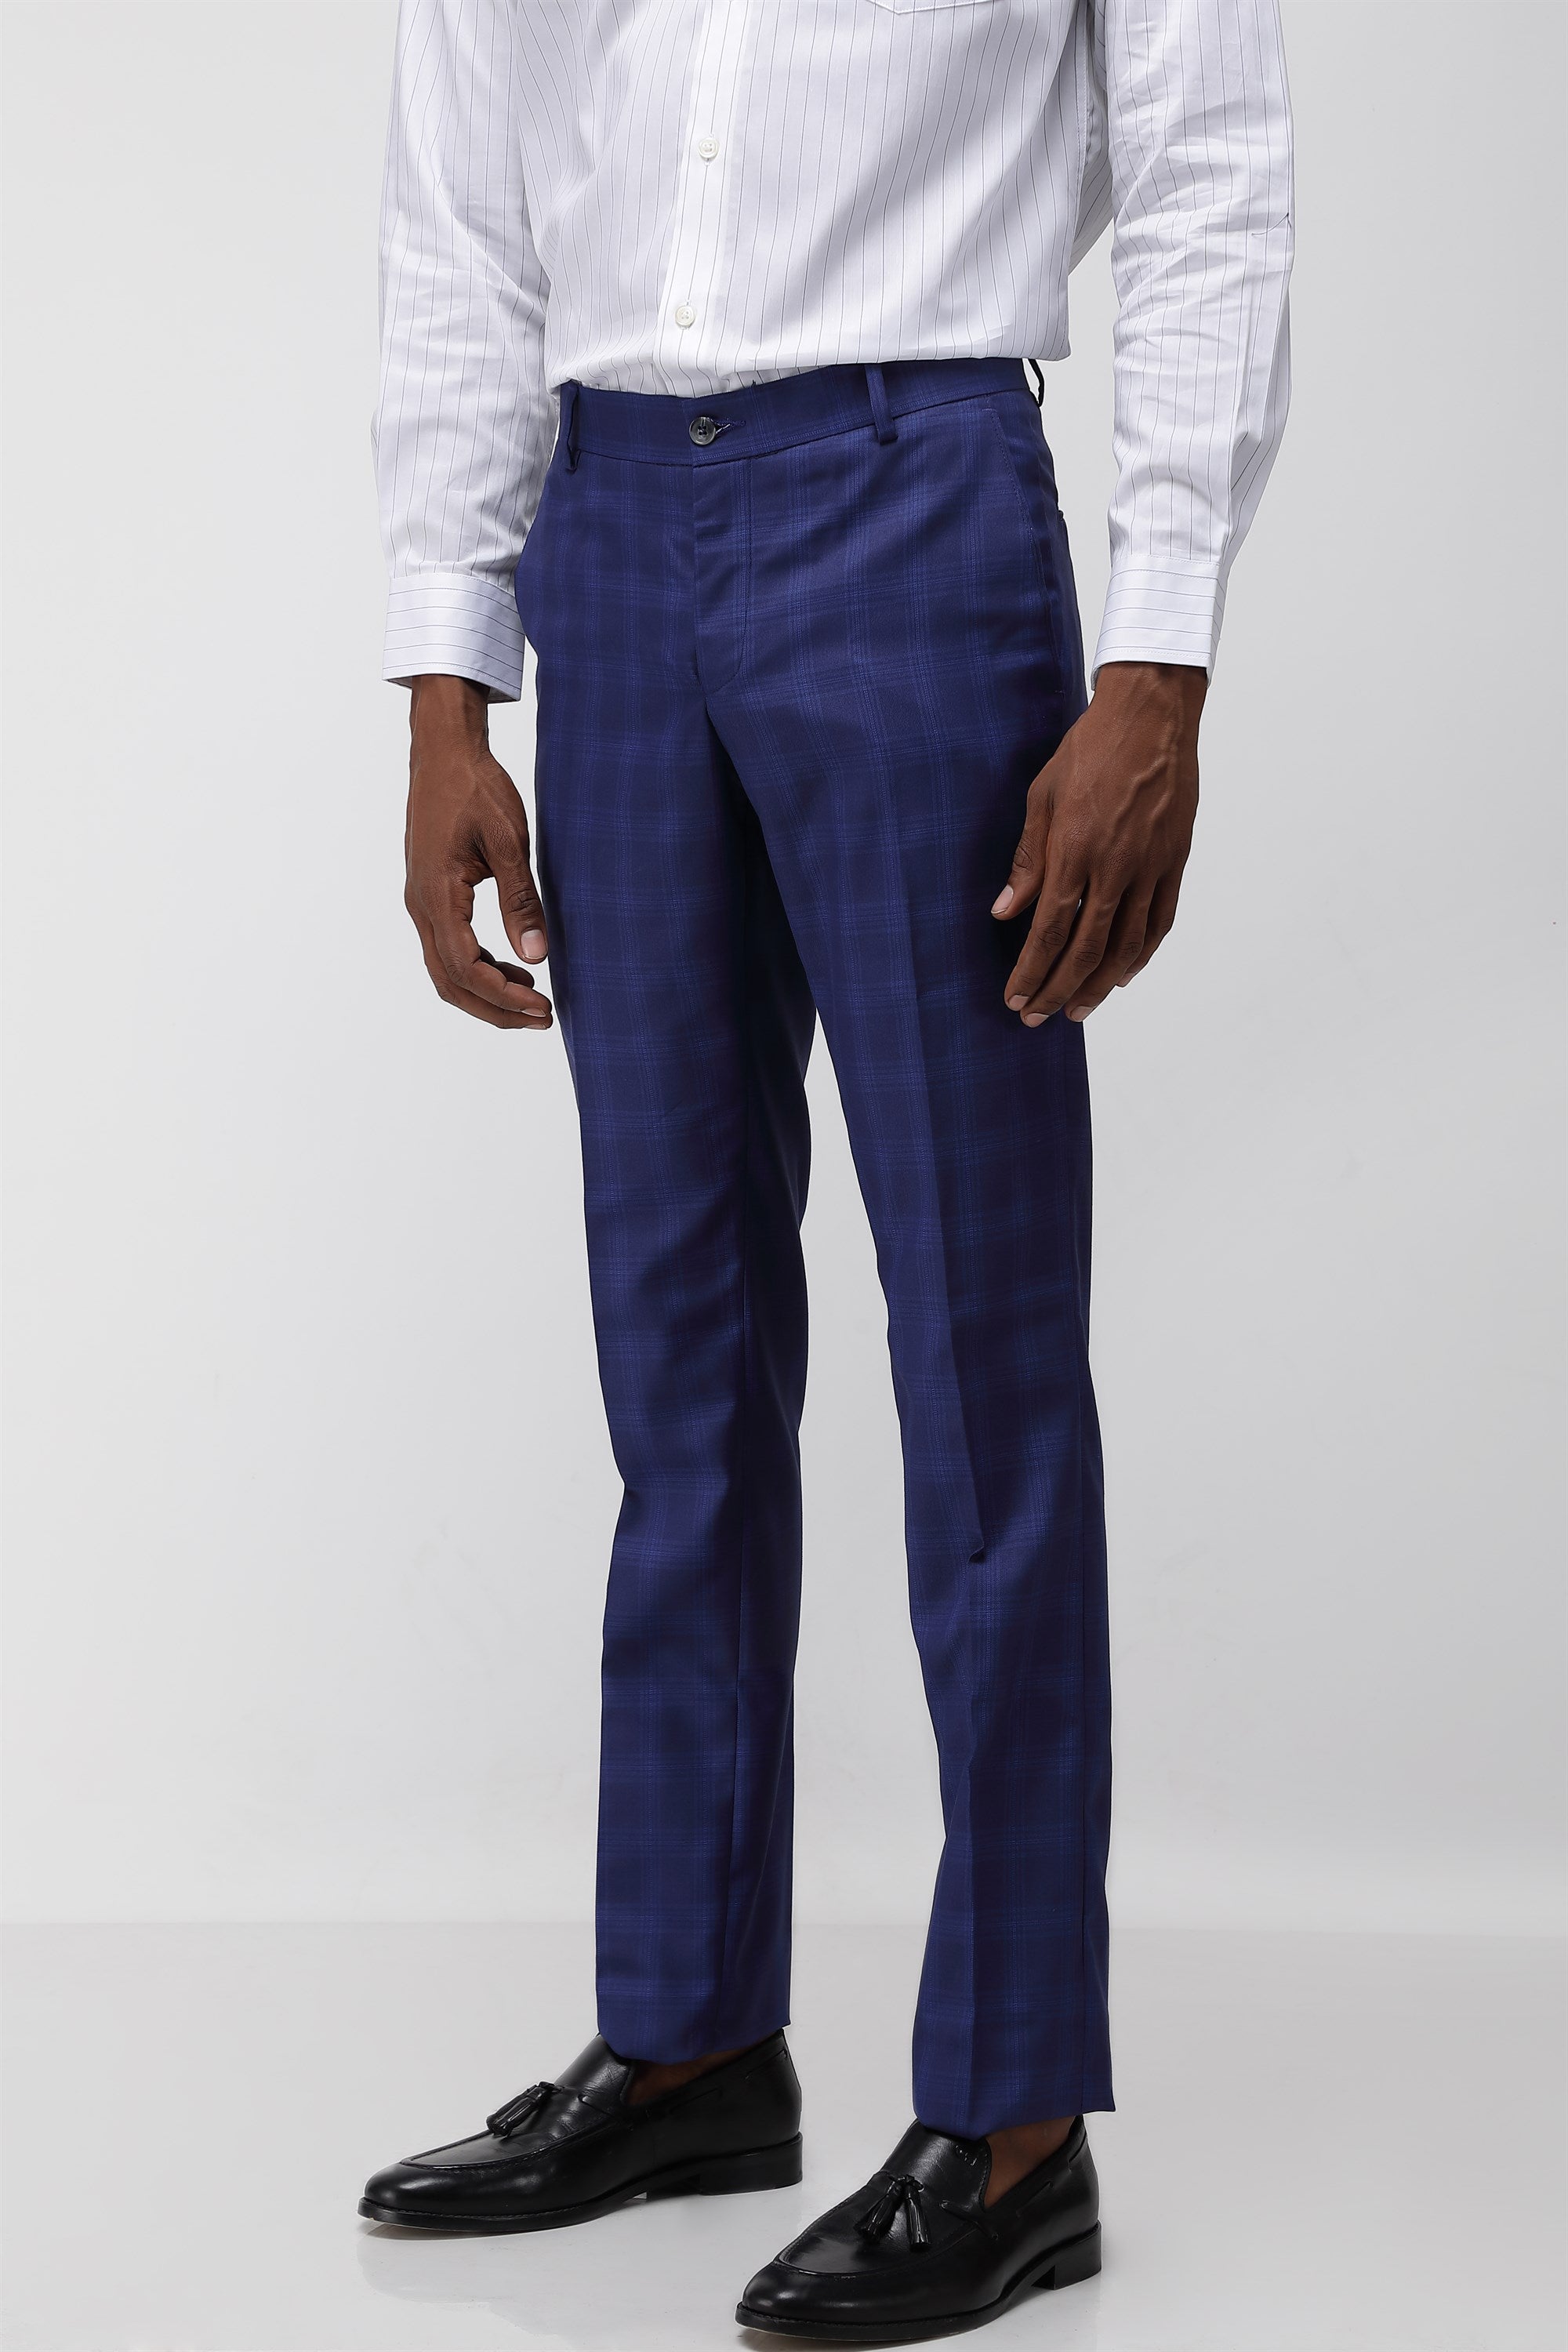 Peter England Formal Trousers  Buy Peter England Men Grey Check Carrot Fit  Trousers Online  Nykaa Fashion